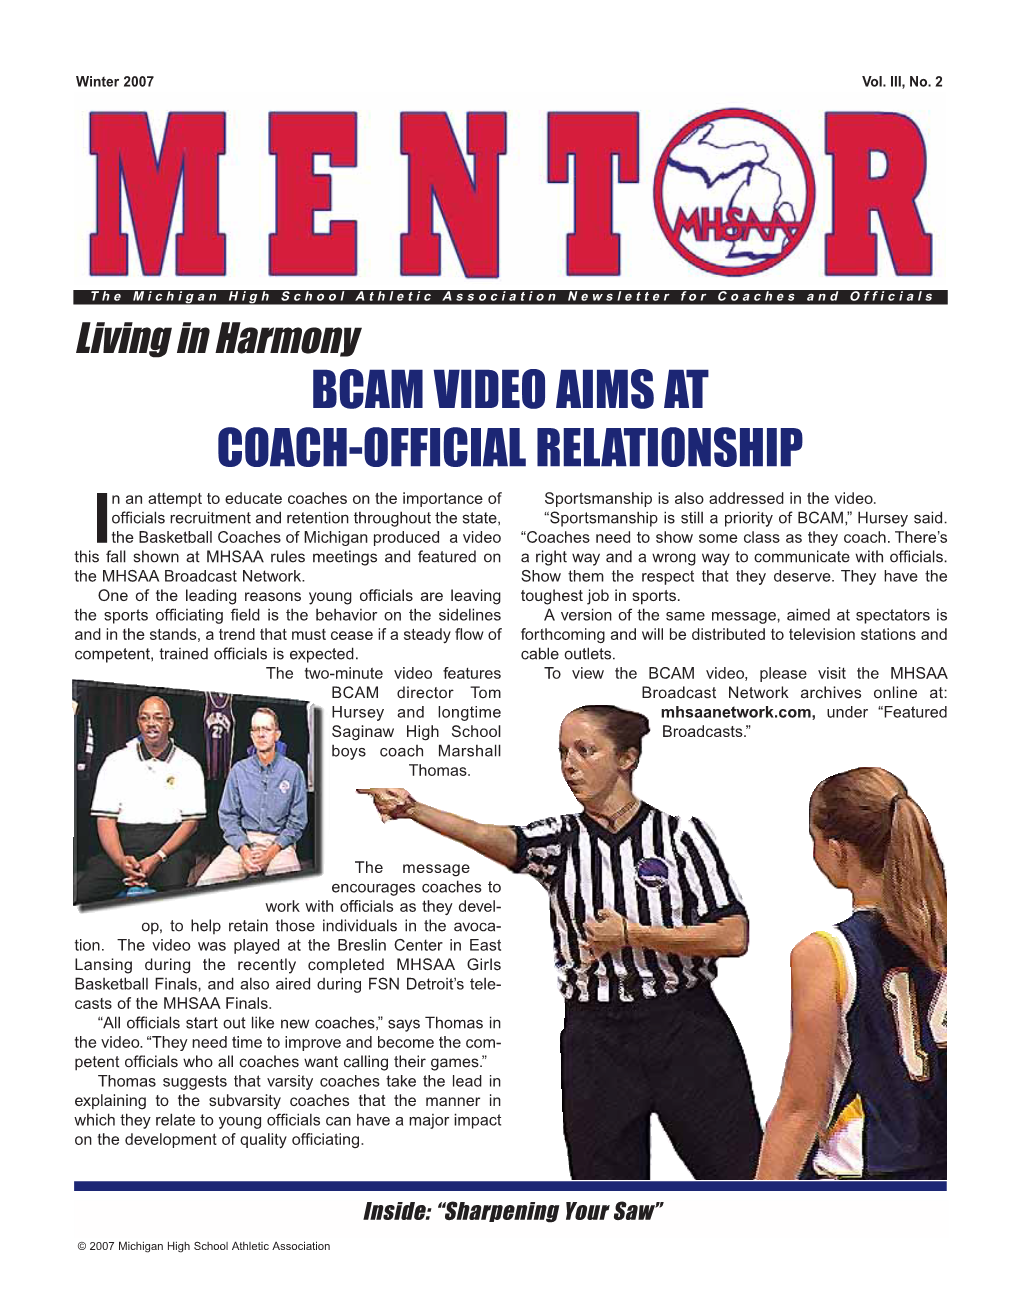 BCAM VIDEO AIMS at COACH-OFFICIAL RELATIONSHIP N an Attempt to Educate Coaches on the Importance of Sportsmanship Is Also Addressed in the Video